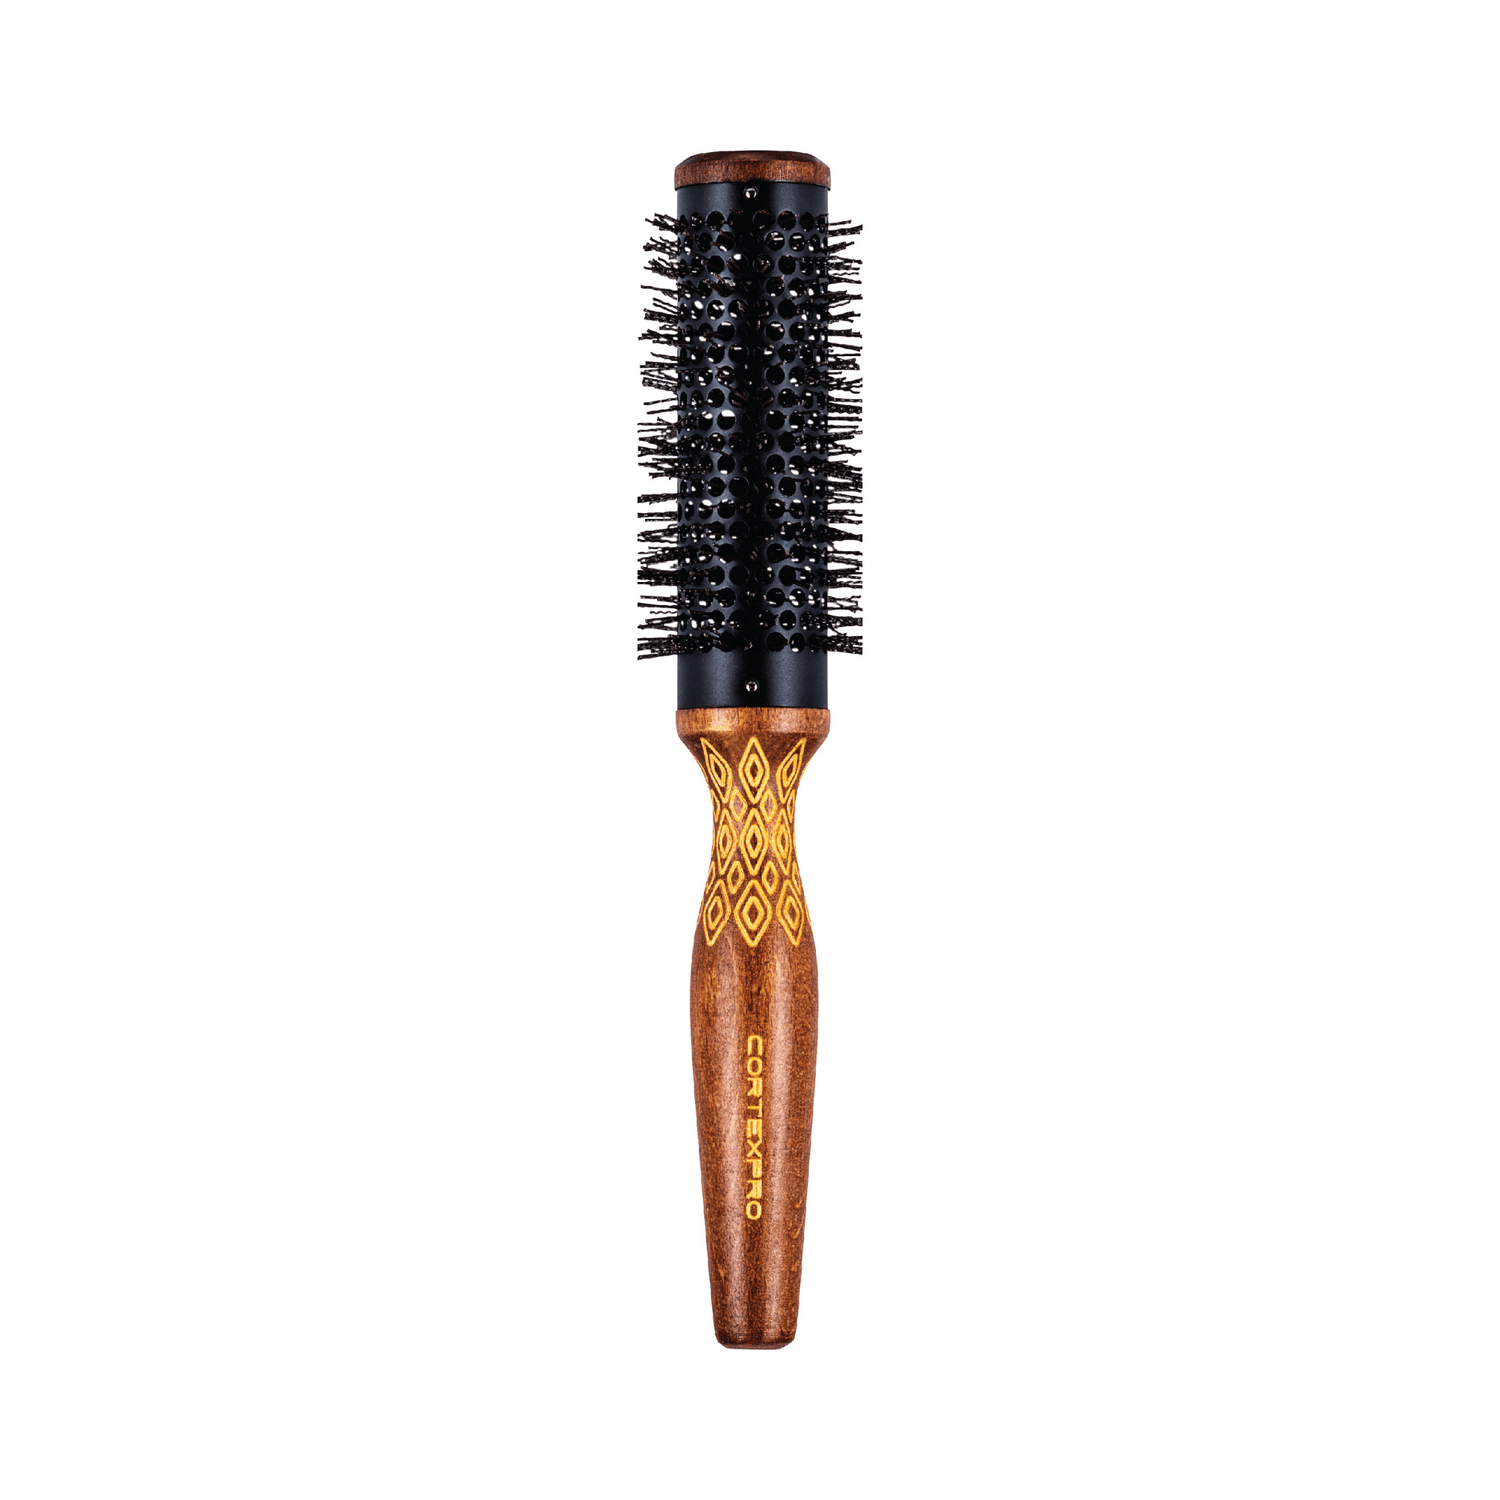 CortexPro Thermal Heat Activated Round Brush | Bristles Heat to 140F and change color when exposed to heat